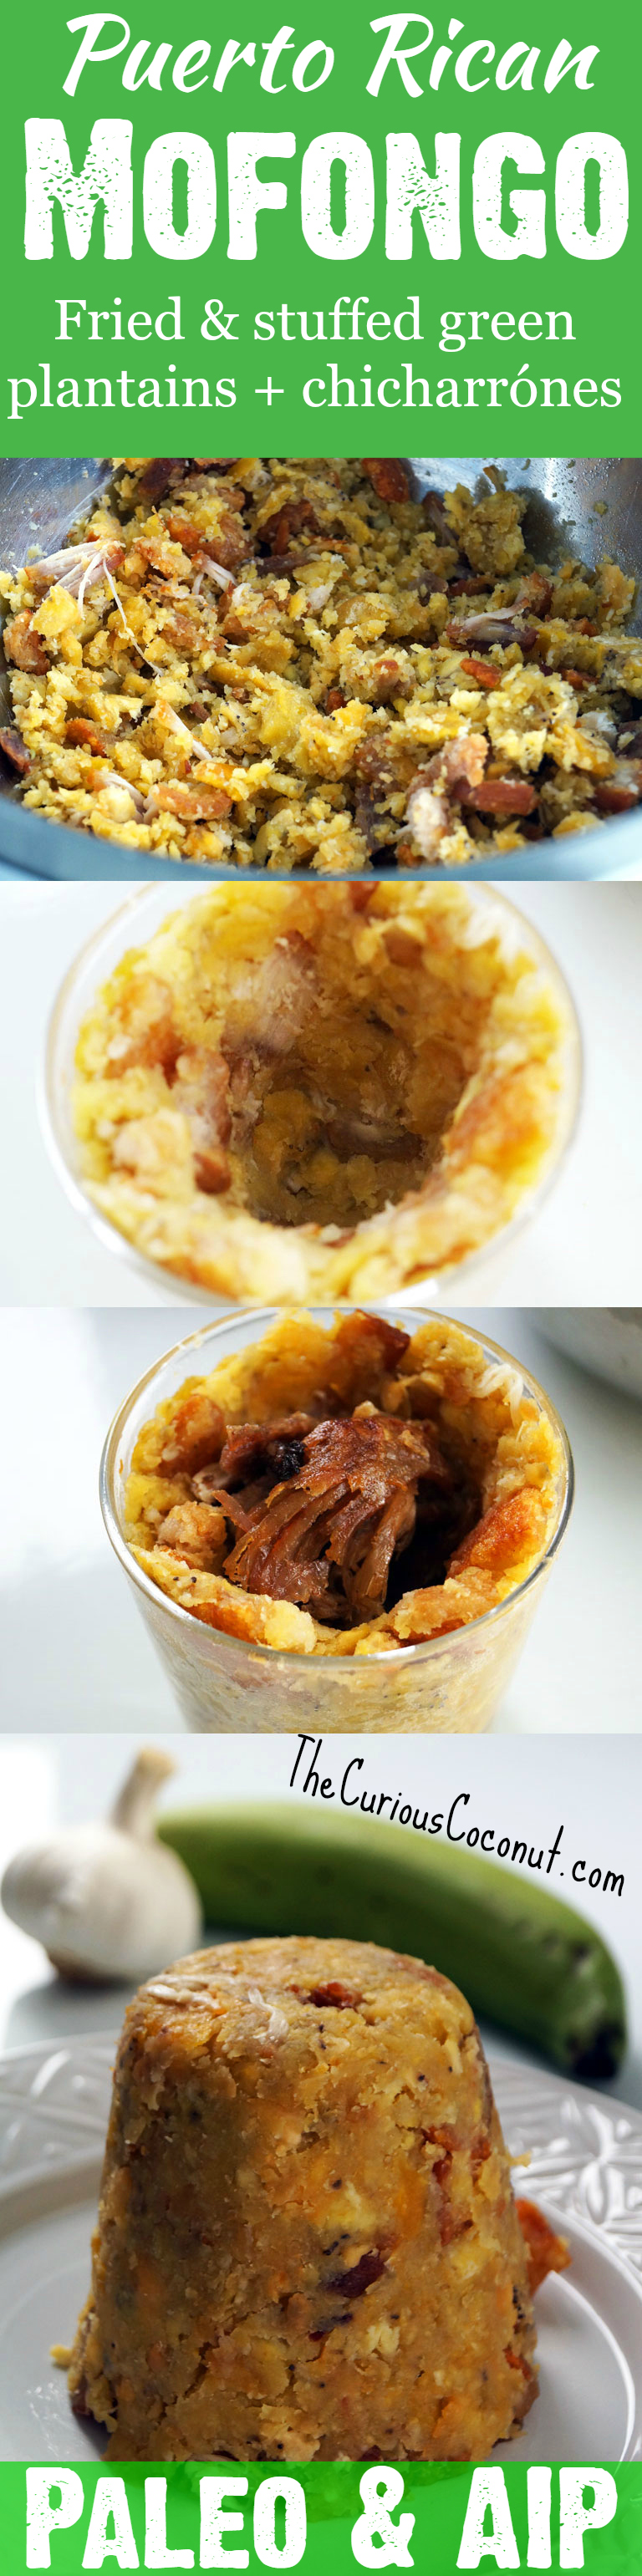 Puerto Rican Mofongo Relleno (Paleo, AIP) — The Curious Coconut